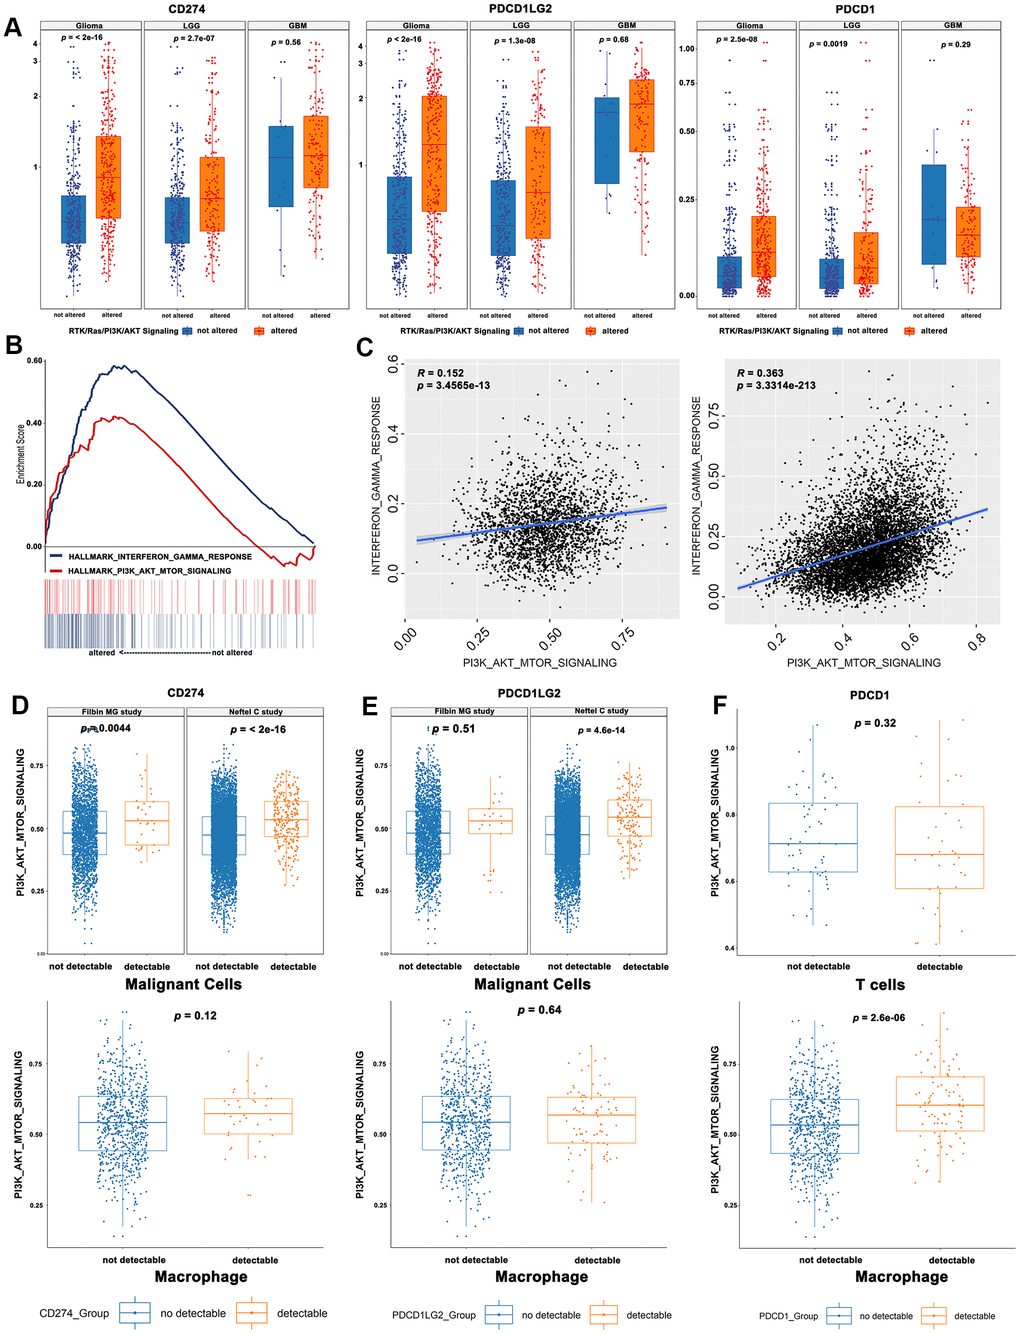 Correlations between RTK/Ras/PI3K/AKT signaling and immune-regulatory genes mRNA signatures. (A) The immune checkpoint genes were significantly upregulated in the activated RTK/Ras/PI3K/AKT signaling. (B) GSEA analysis showed a prominent enrichment of IFNγ pathways and PI3K-AKT-mTOR. (C) The single cell RNA seq showed a significant correlation between PI3K-AKT-mTOR and IFNγ pathway. The glioma cells with detectable CD274 (D) or PDCD1LG2 (E) showed an elevated activity of “PI3K